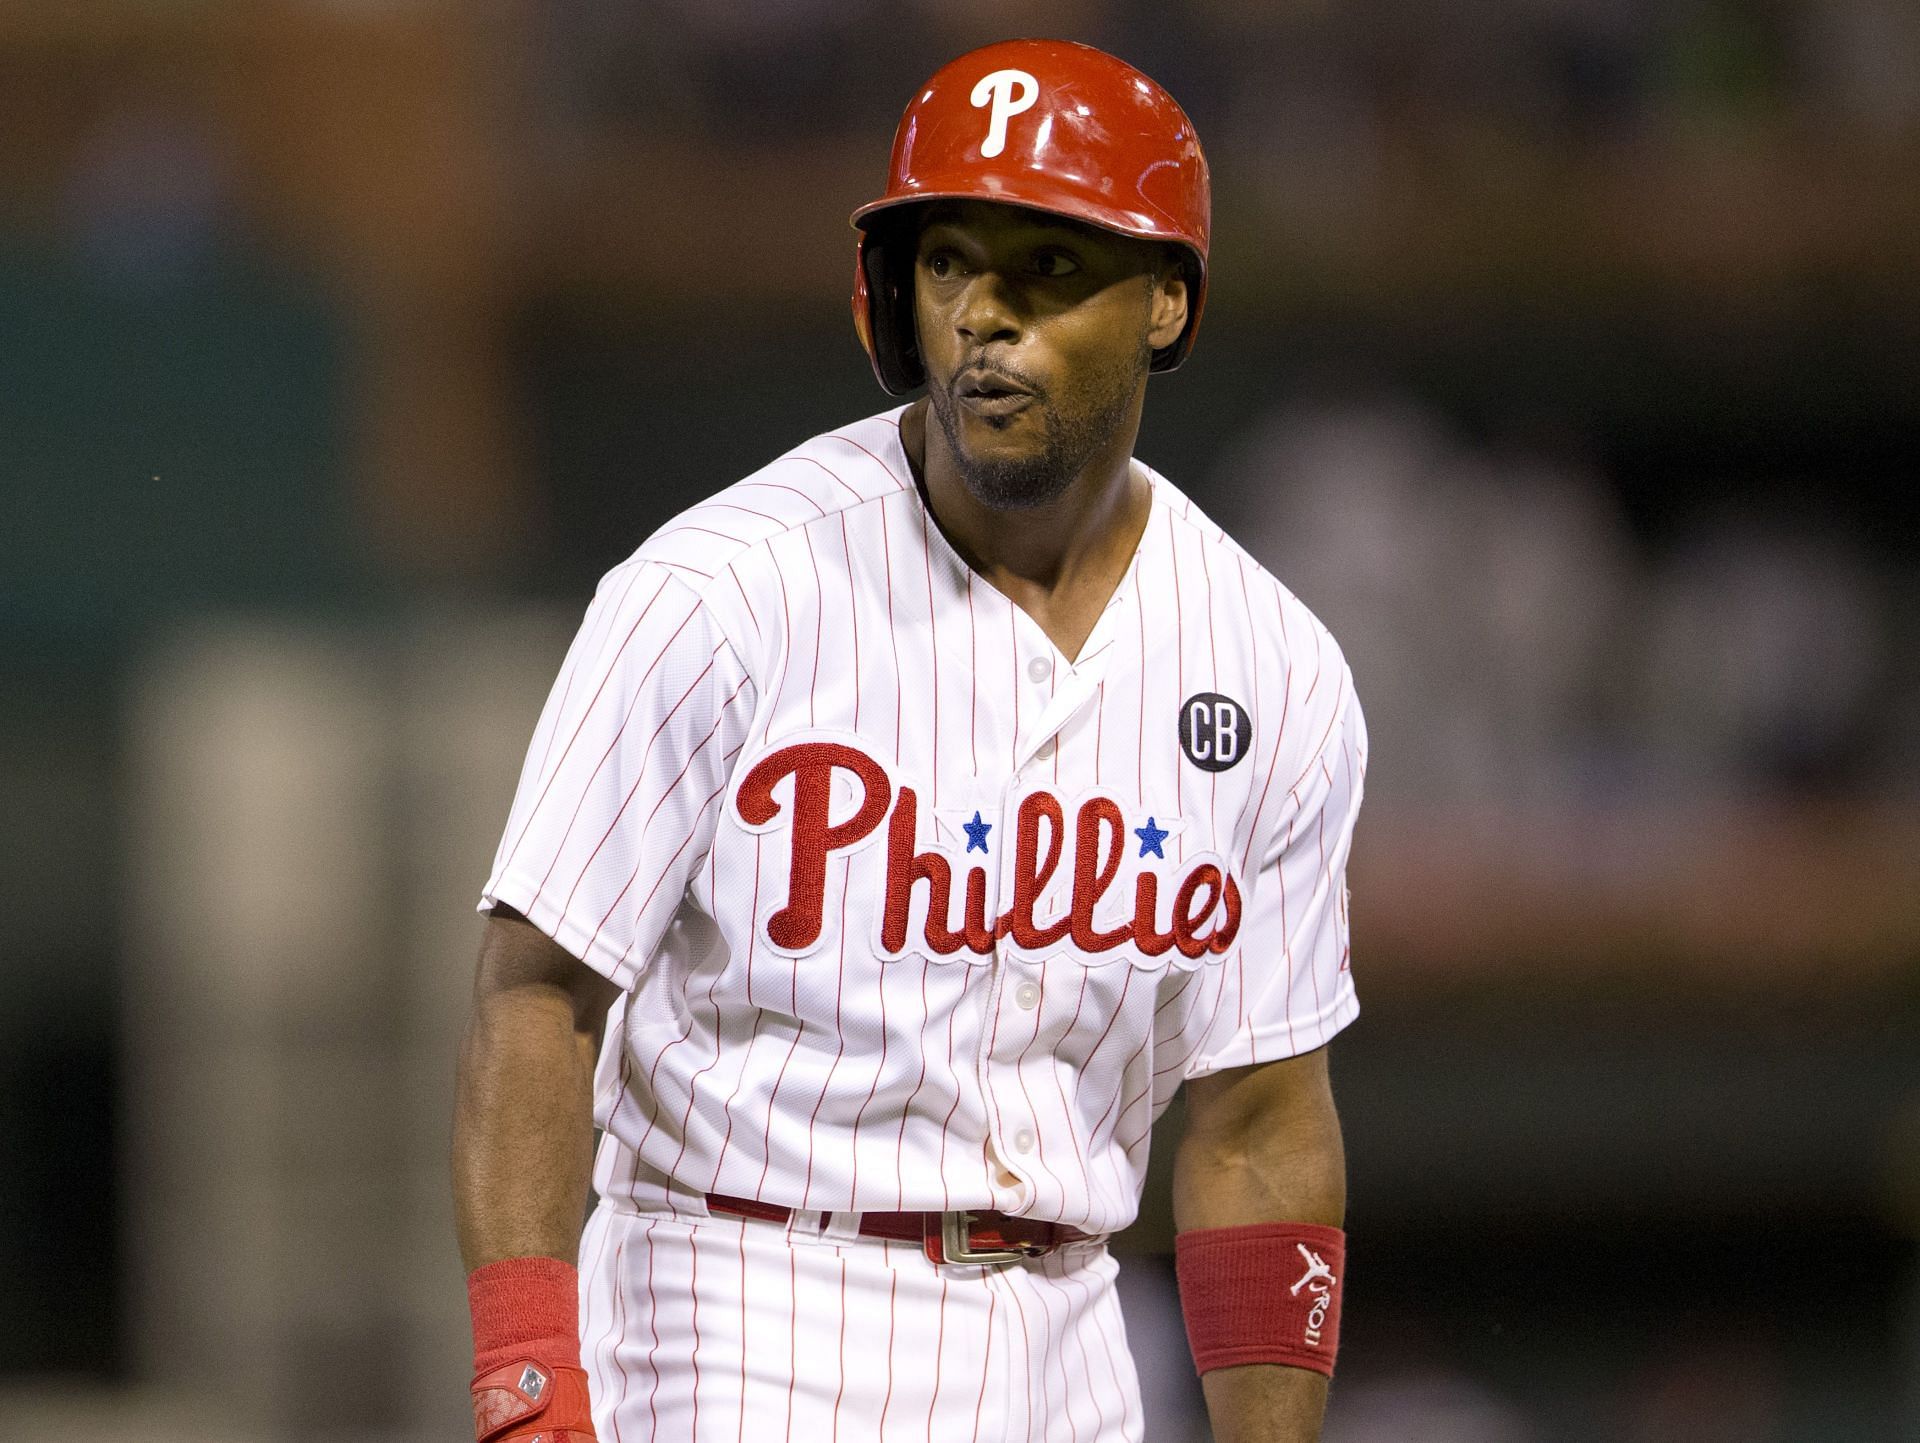 Former Philadelphia Phillies shortstop Jimmy Rollins helped Harper ease into the designated hitter role.